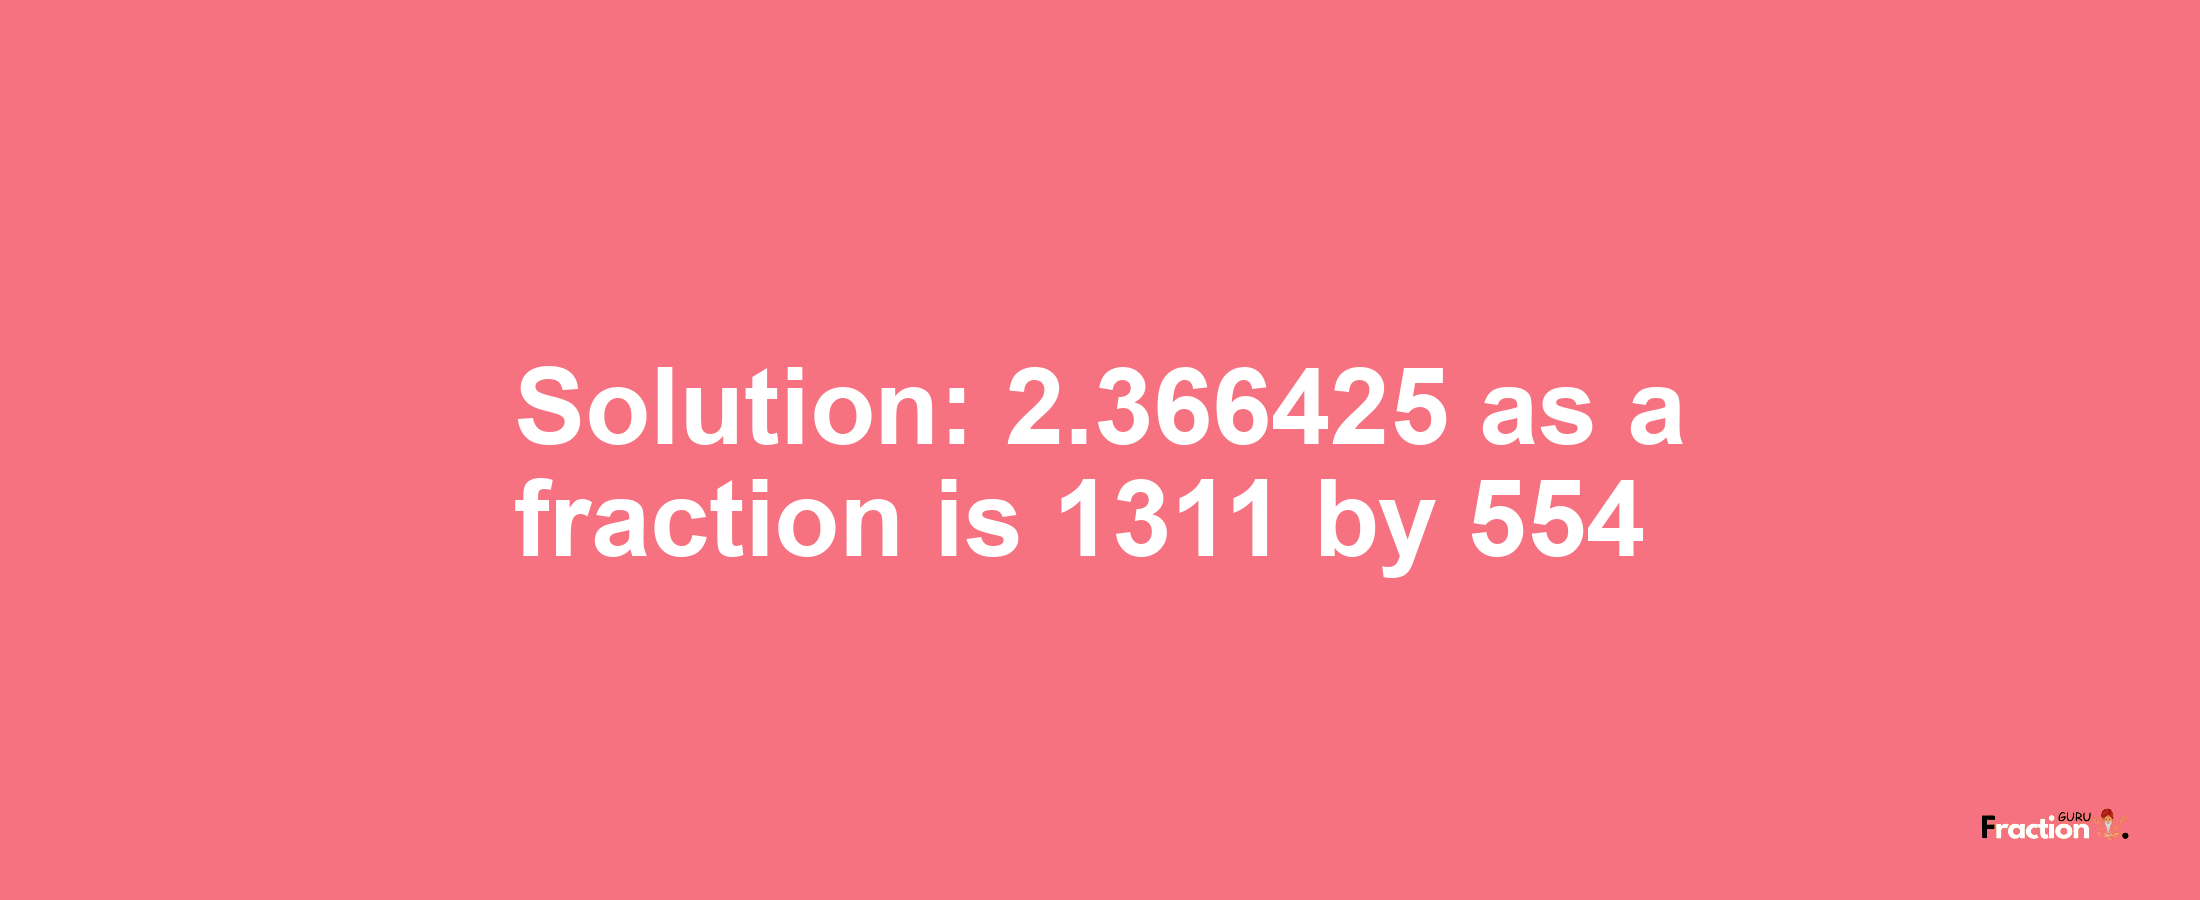 Solution:2.366425 as a fraction is 1311/554